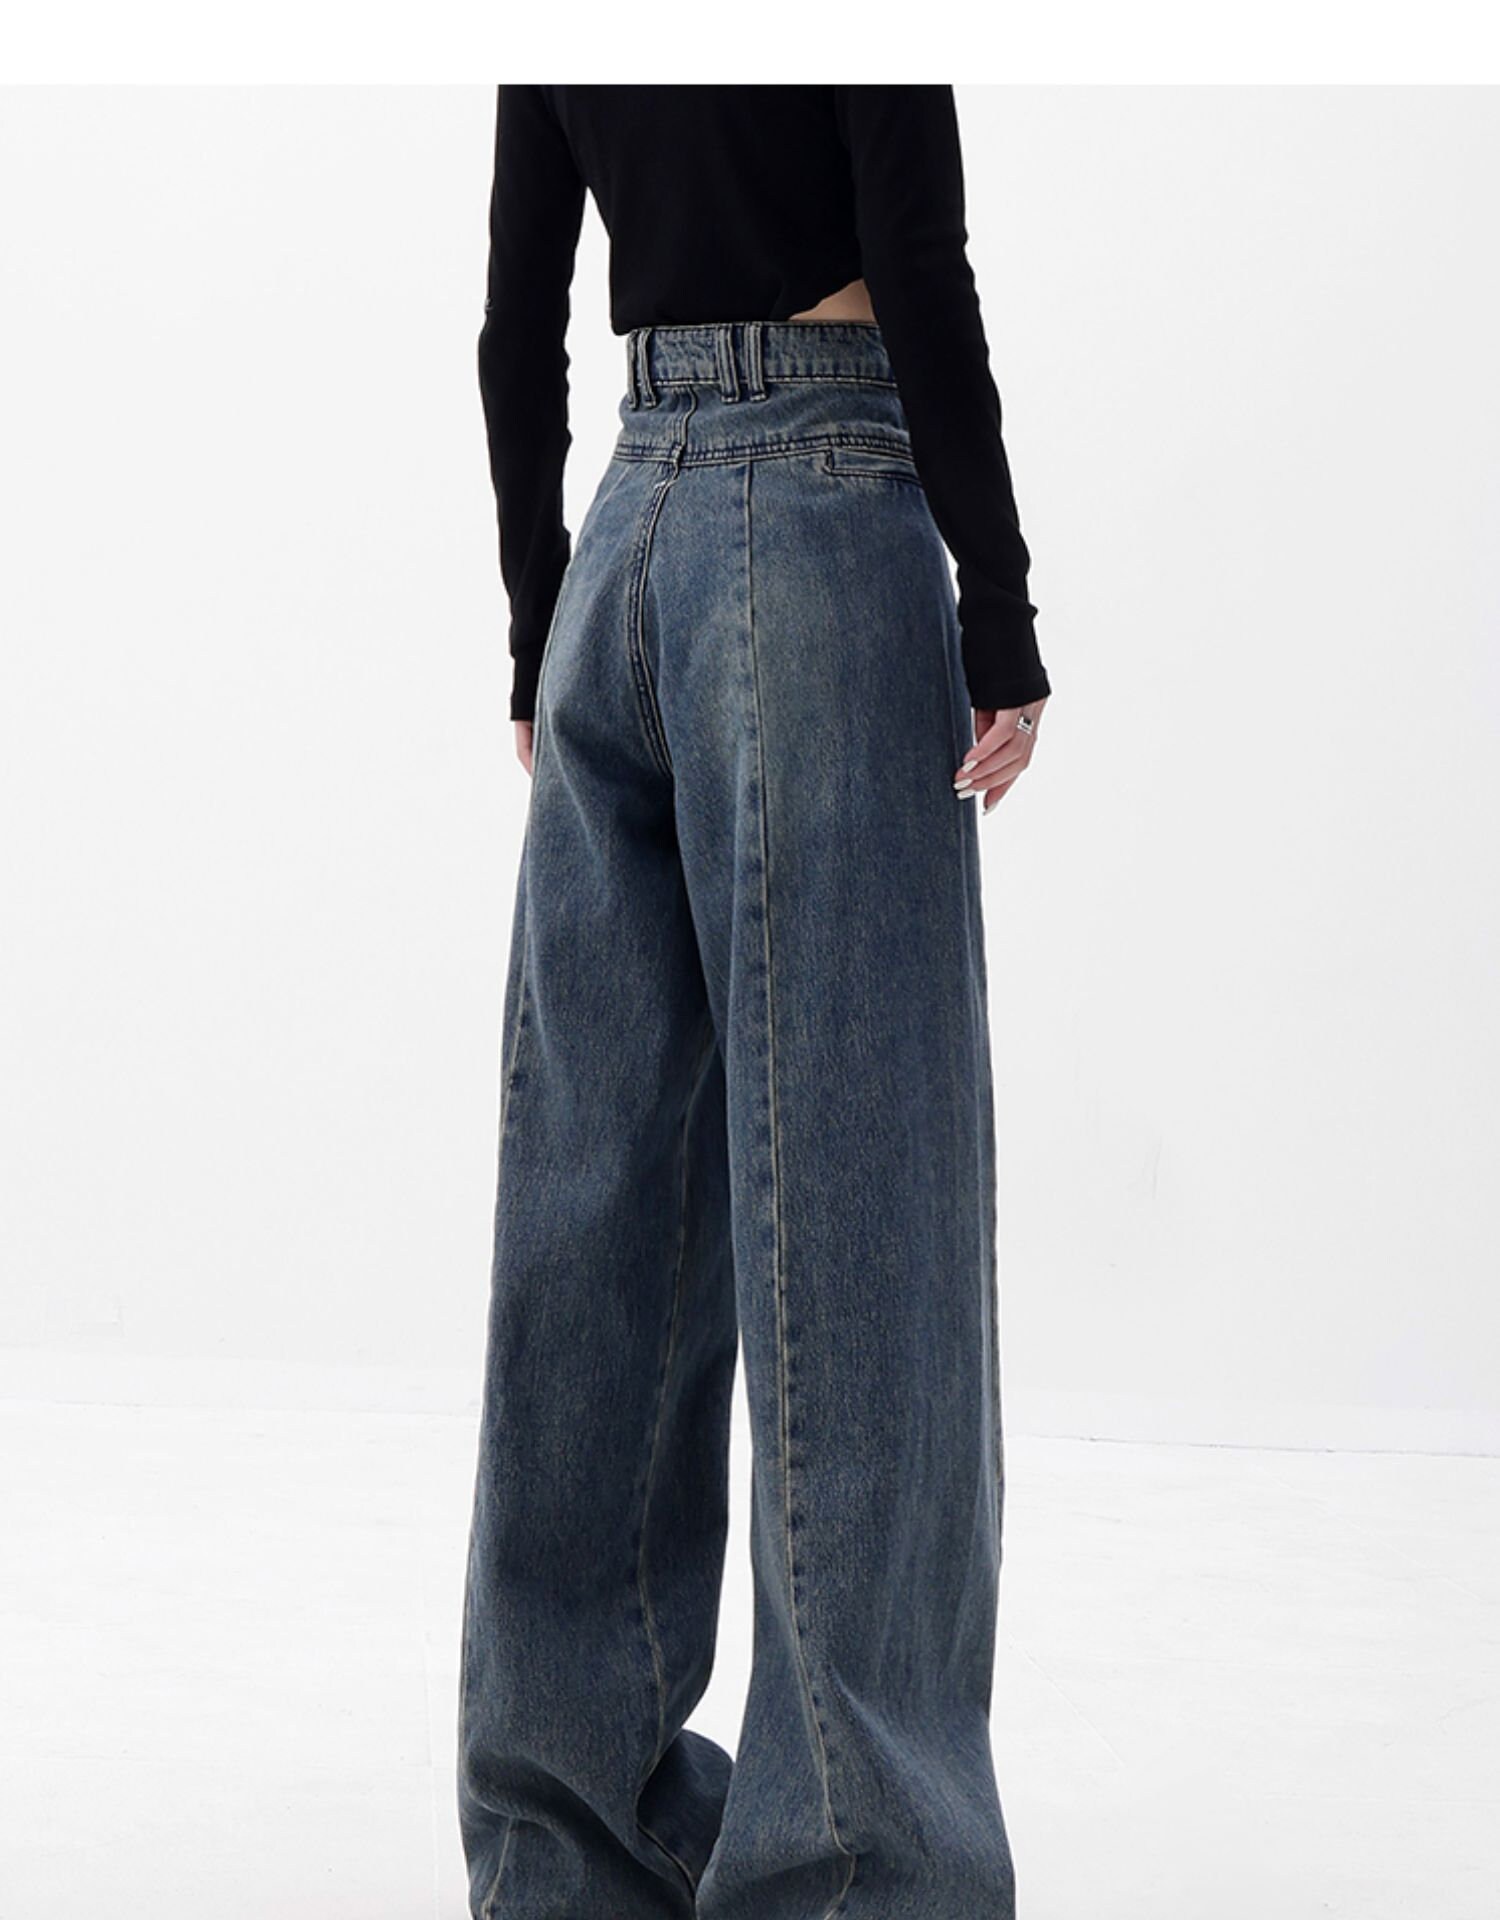 Vintage High Waist Oversized Baggy Jeans Baggy Jeans Women - Etsy